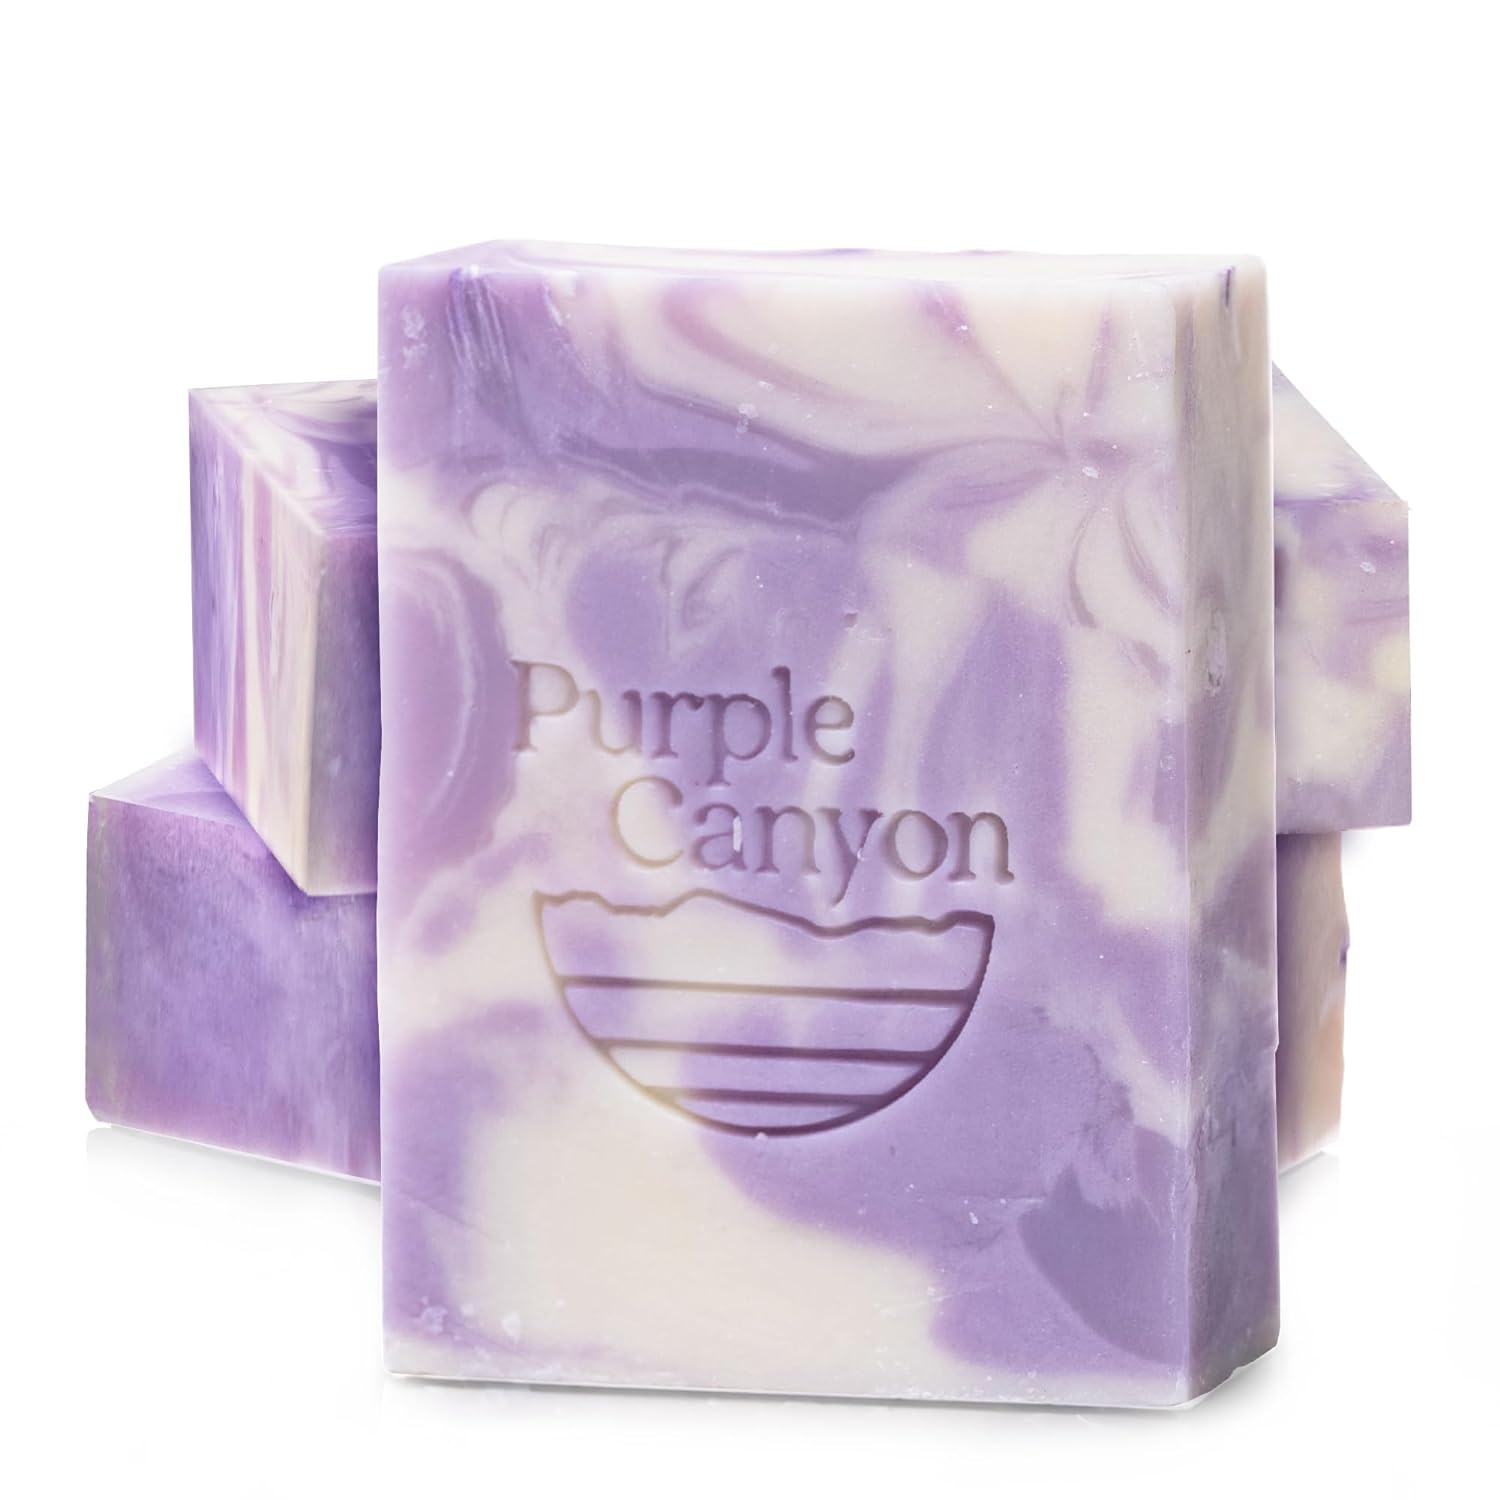 PURPLE CANYON 3 Pack of Handmade Soaps 4 s Each | Bar Soap with Lavender Essential Oil, Cocoa Butter, and Olive Oil | Perfect Moisturizing Skin Care Lavender Gift Set